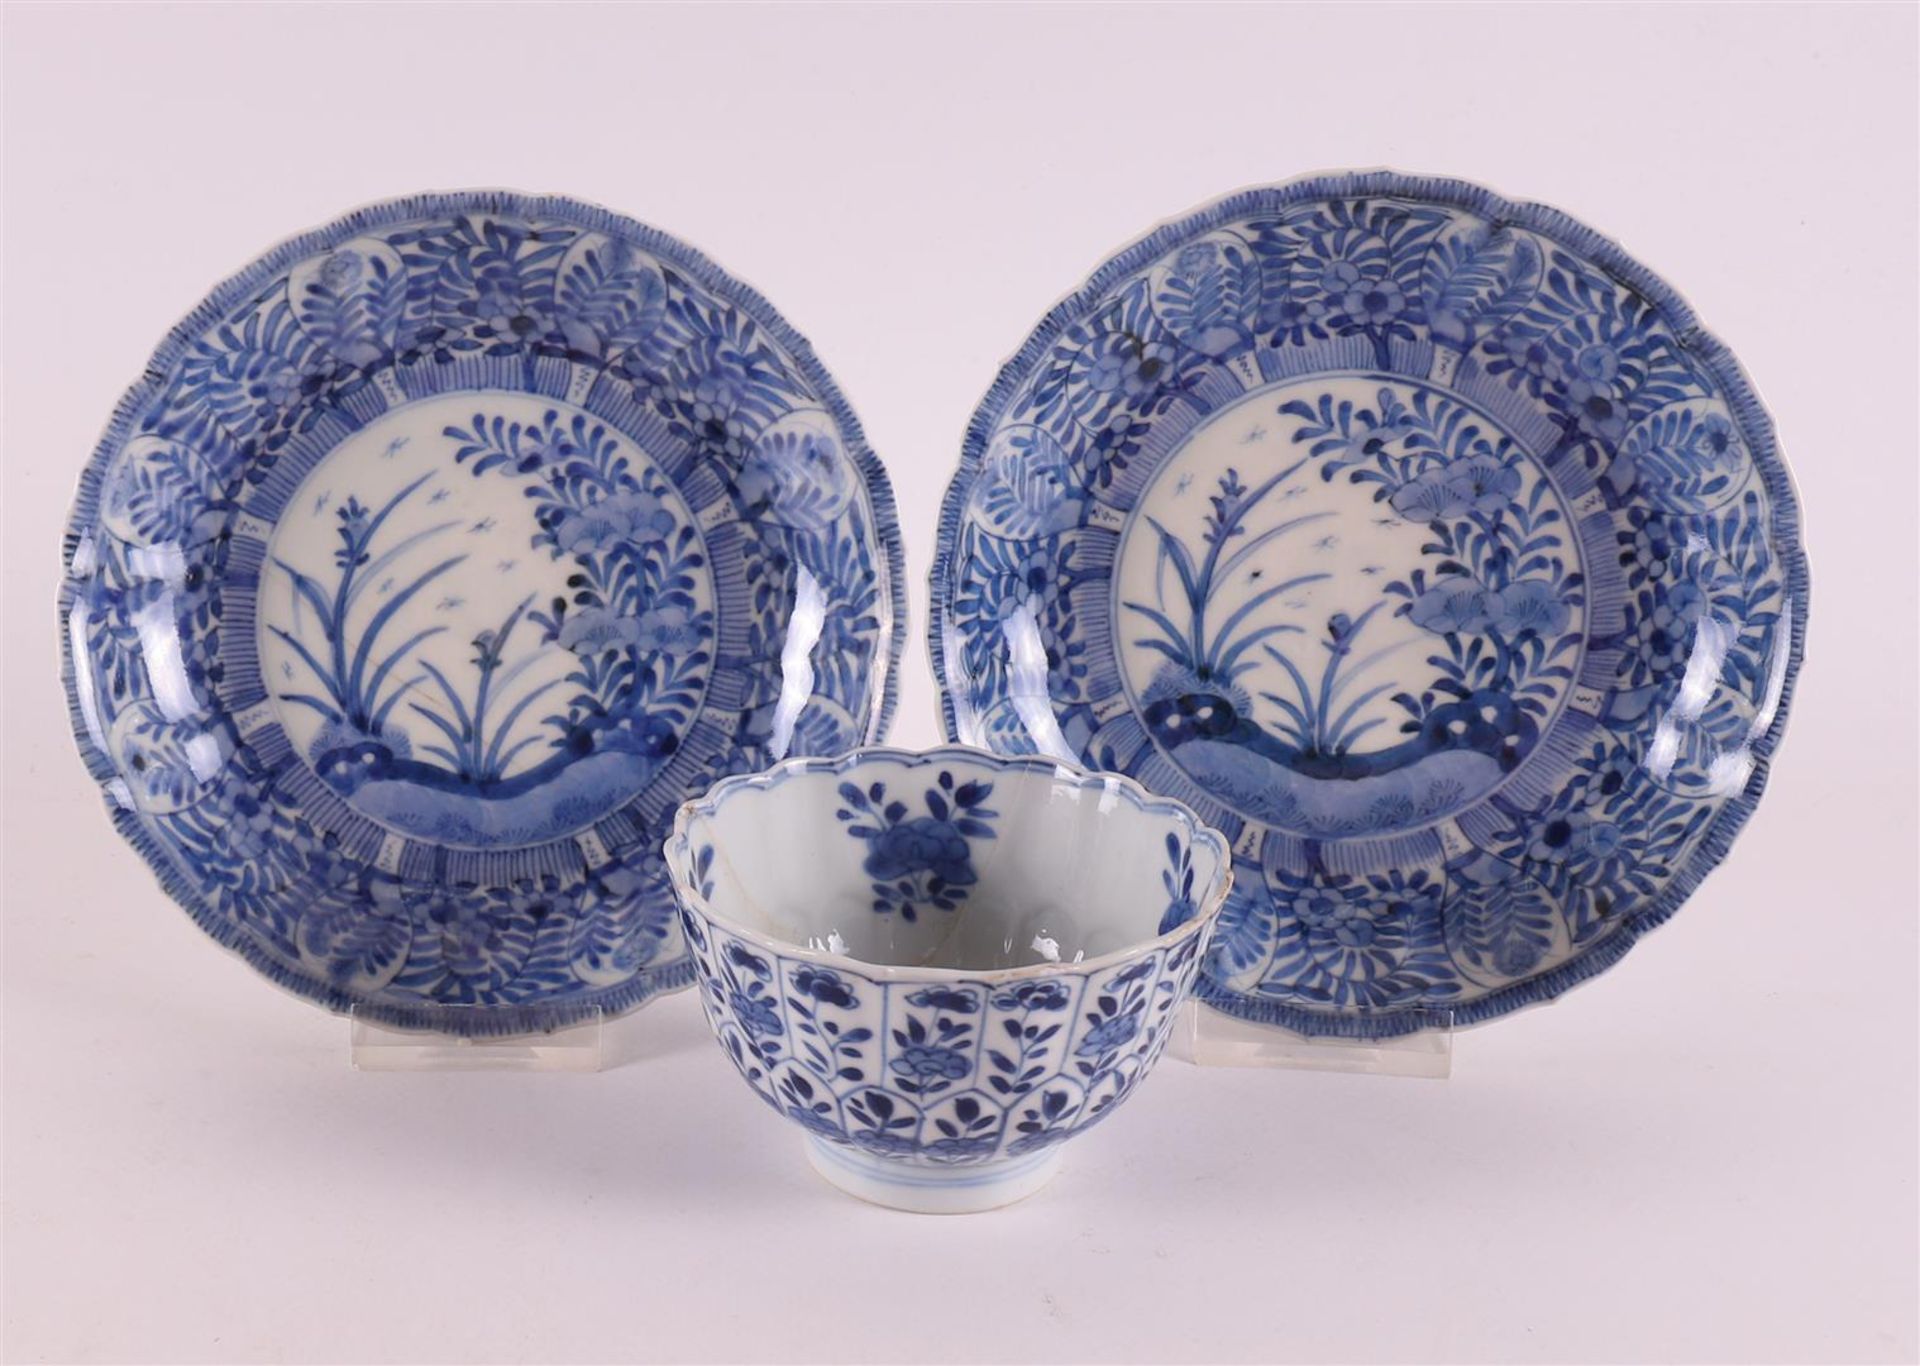 A blue and white porcelain contoured cup and two saucers, China, 19th century. Blue underglaze